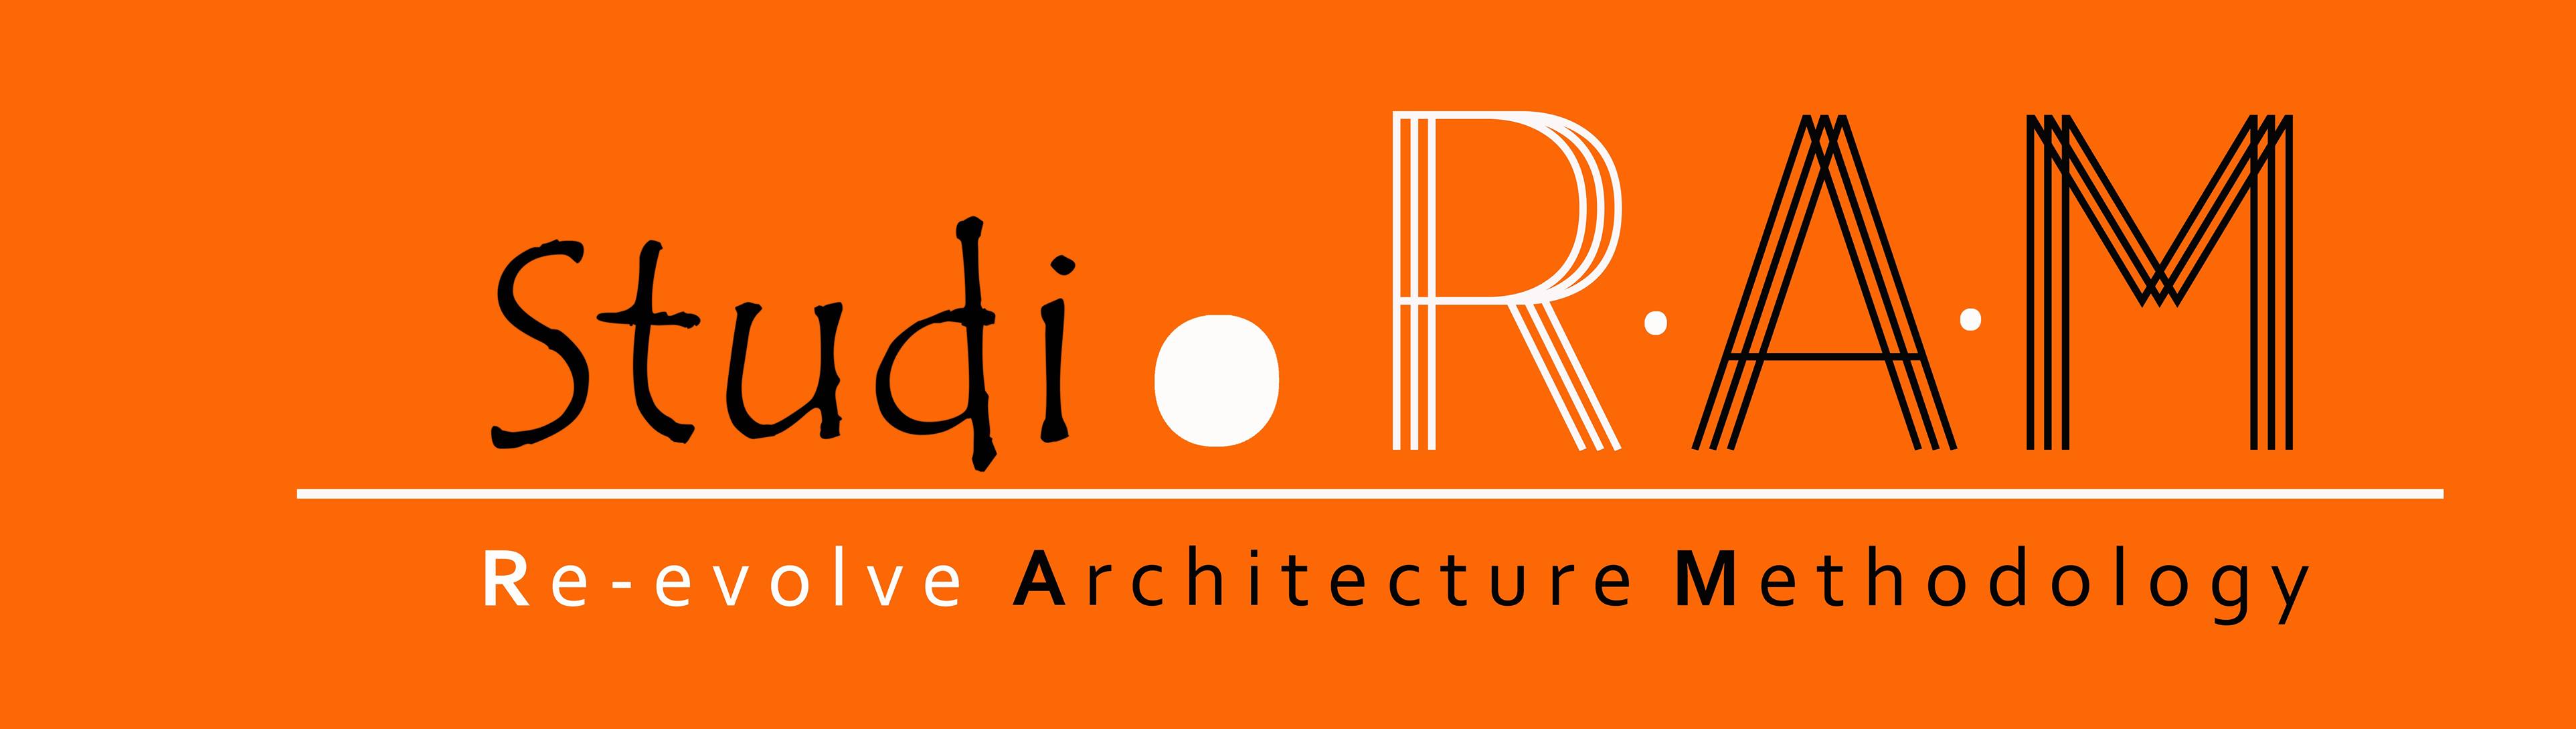 Studio RAM architects|Accounting Services|Professional Services